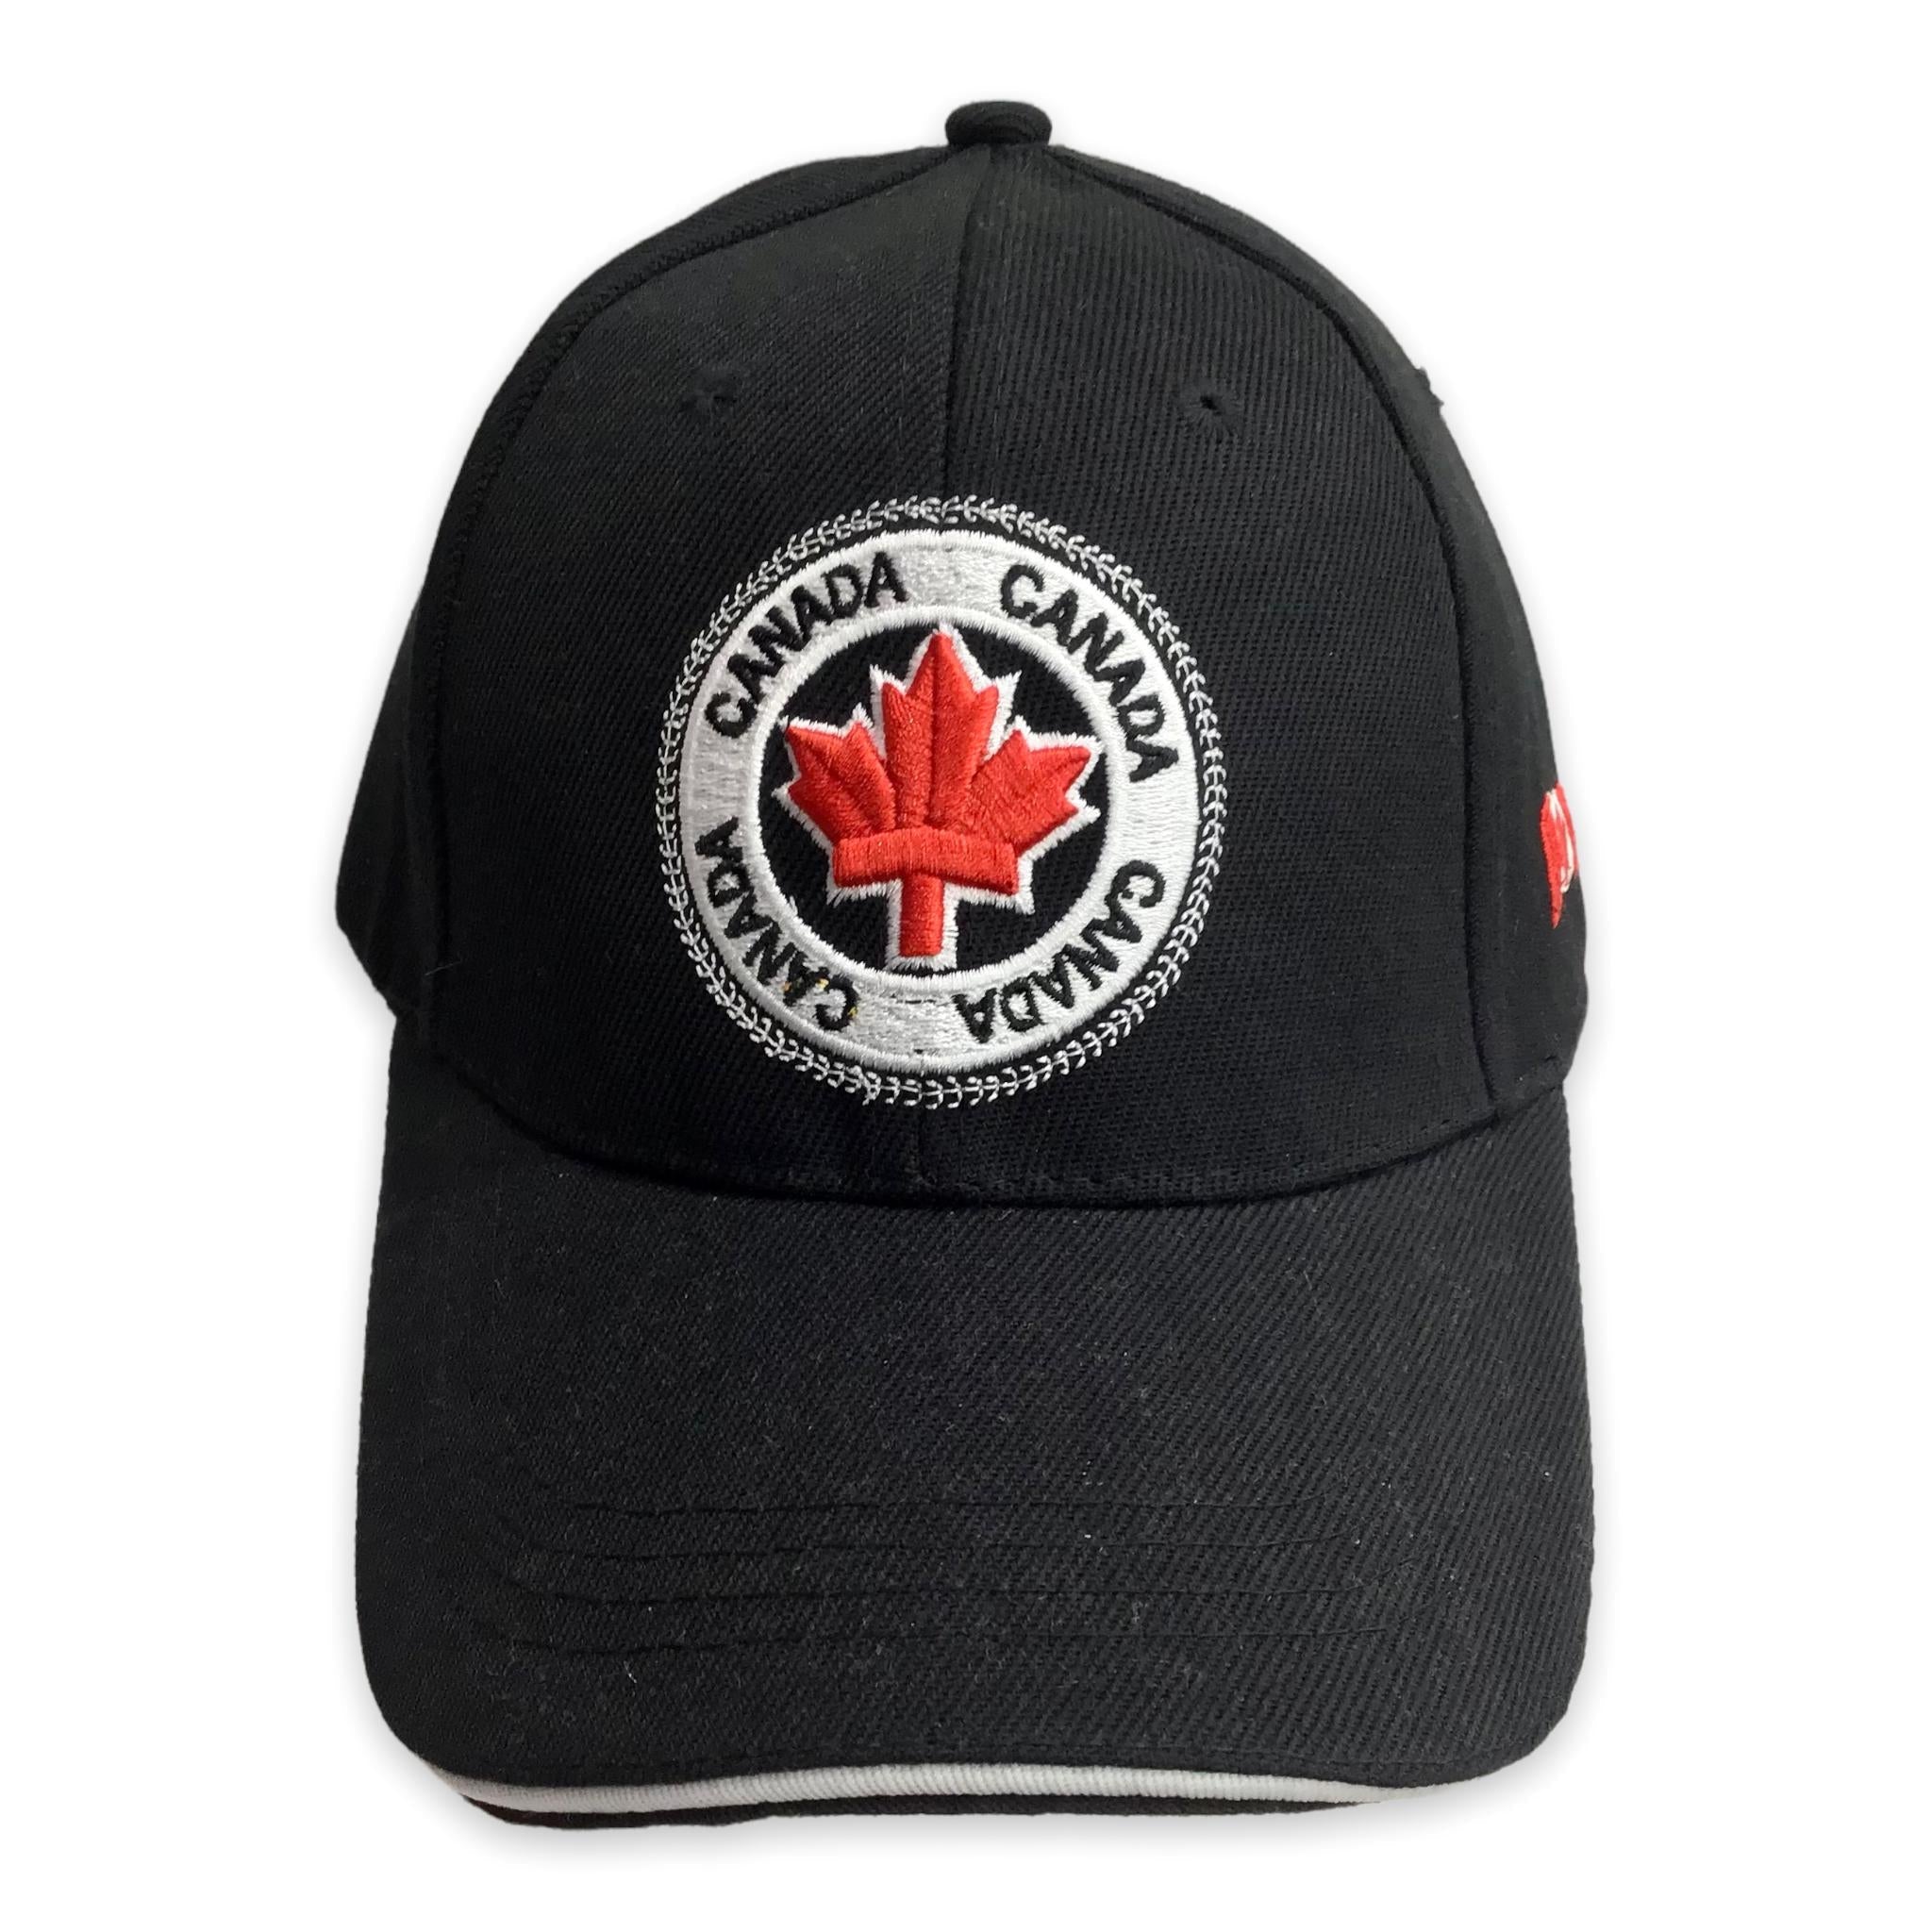 Canada Black Hat w/ Circle Stamp Maple Leaf Red & White Embroidered Baseball Cap - Classic Adjustable Cap Hat